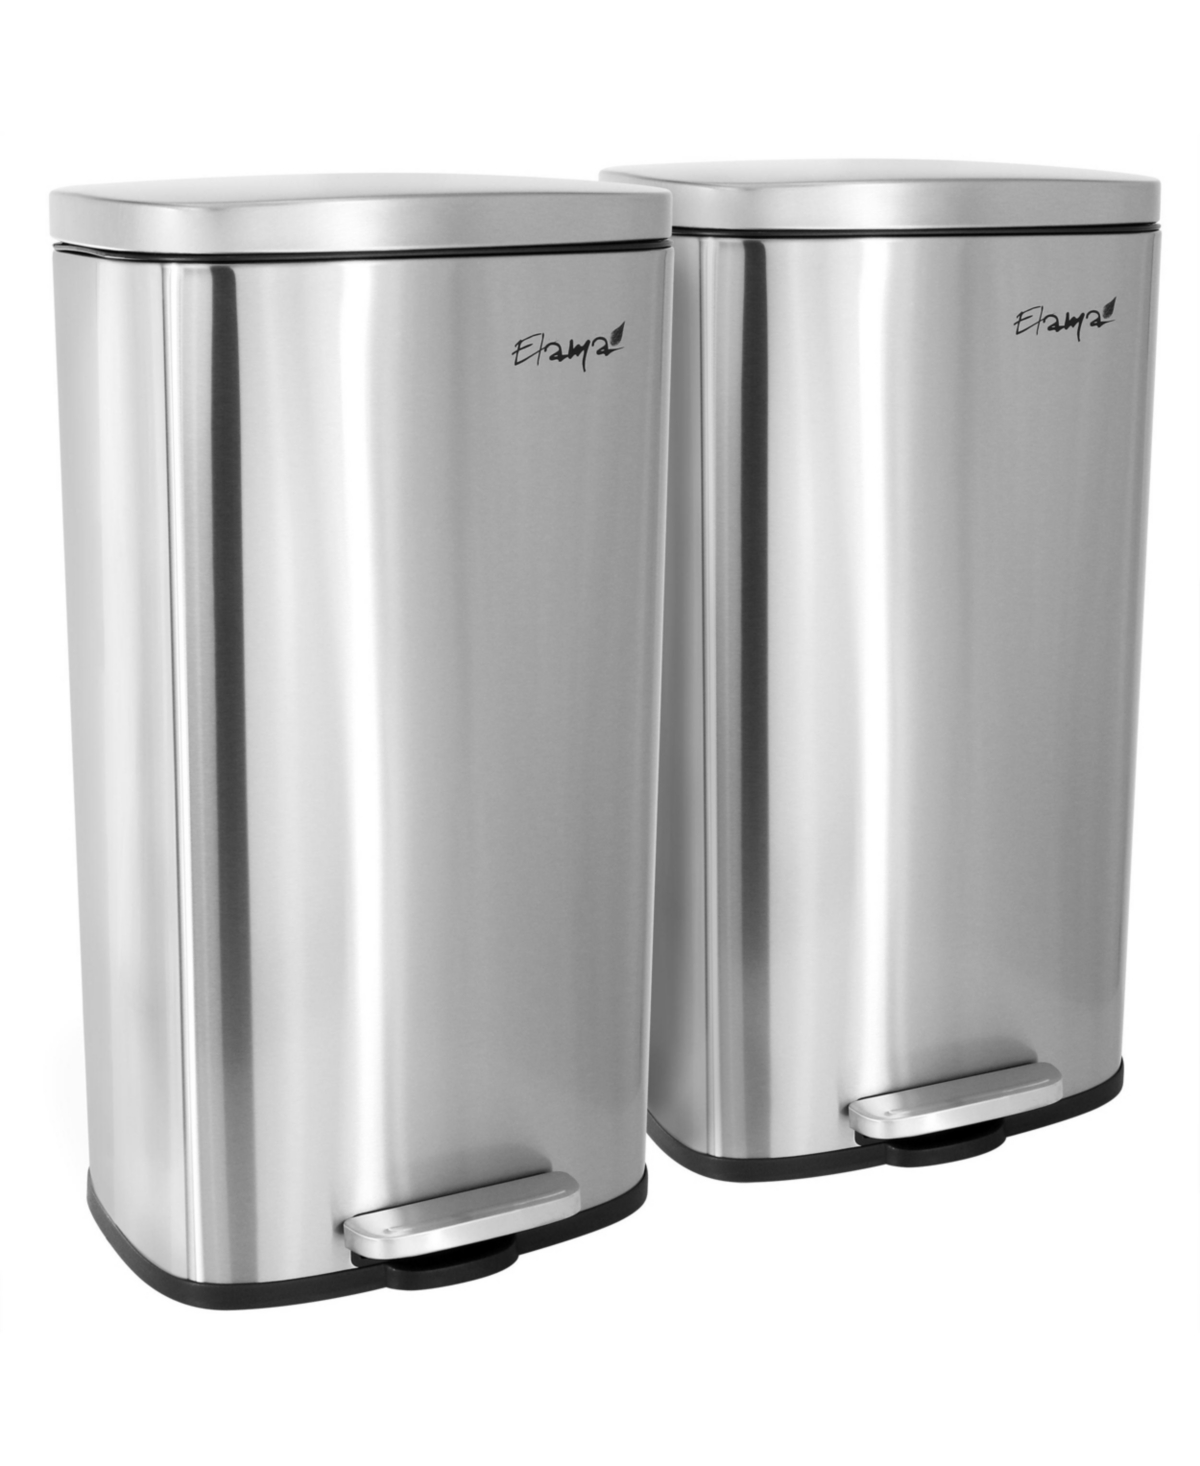 2 piece 8 Gallon Each 30 Liter Rectangular Stainless Steel Twin Step Trash Bins with Slow Close Mechanism in Matte Silver - Silver